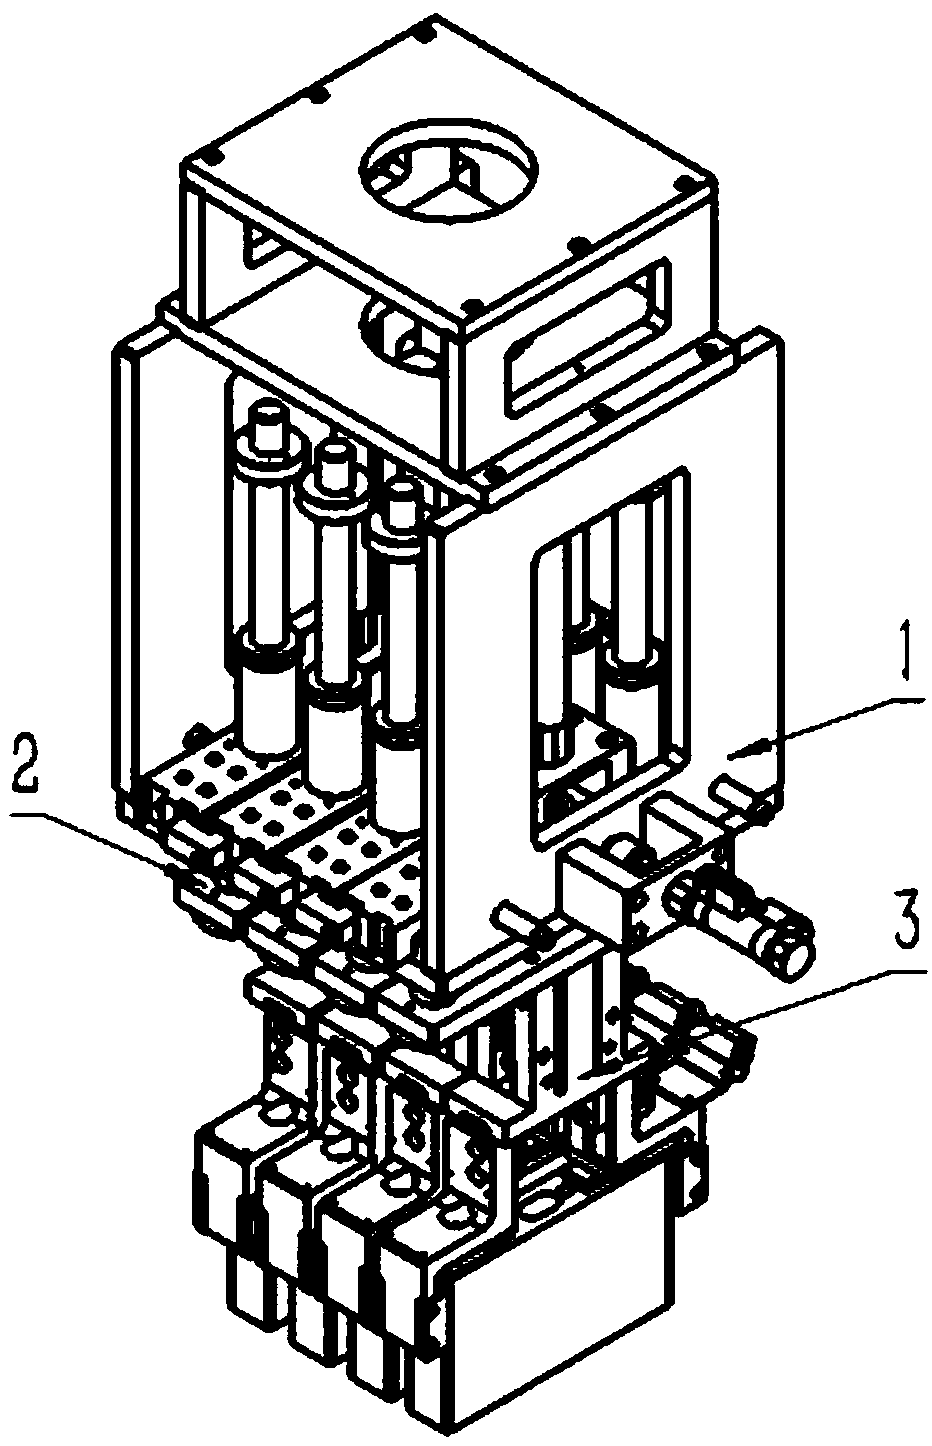 Pitch-variable carrying device for square shell lithium battery